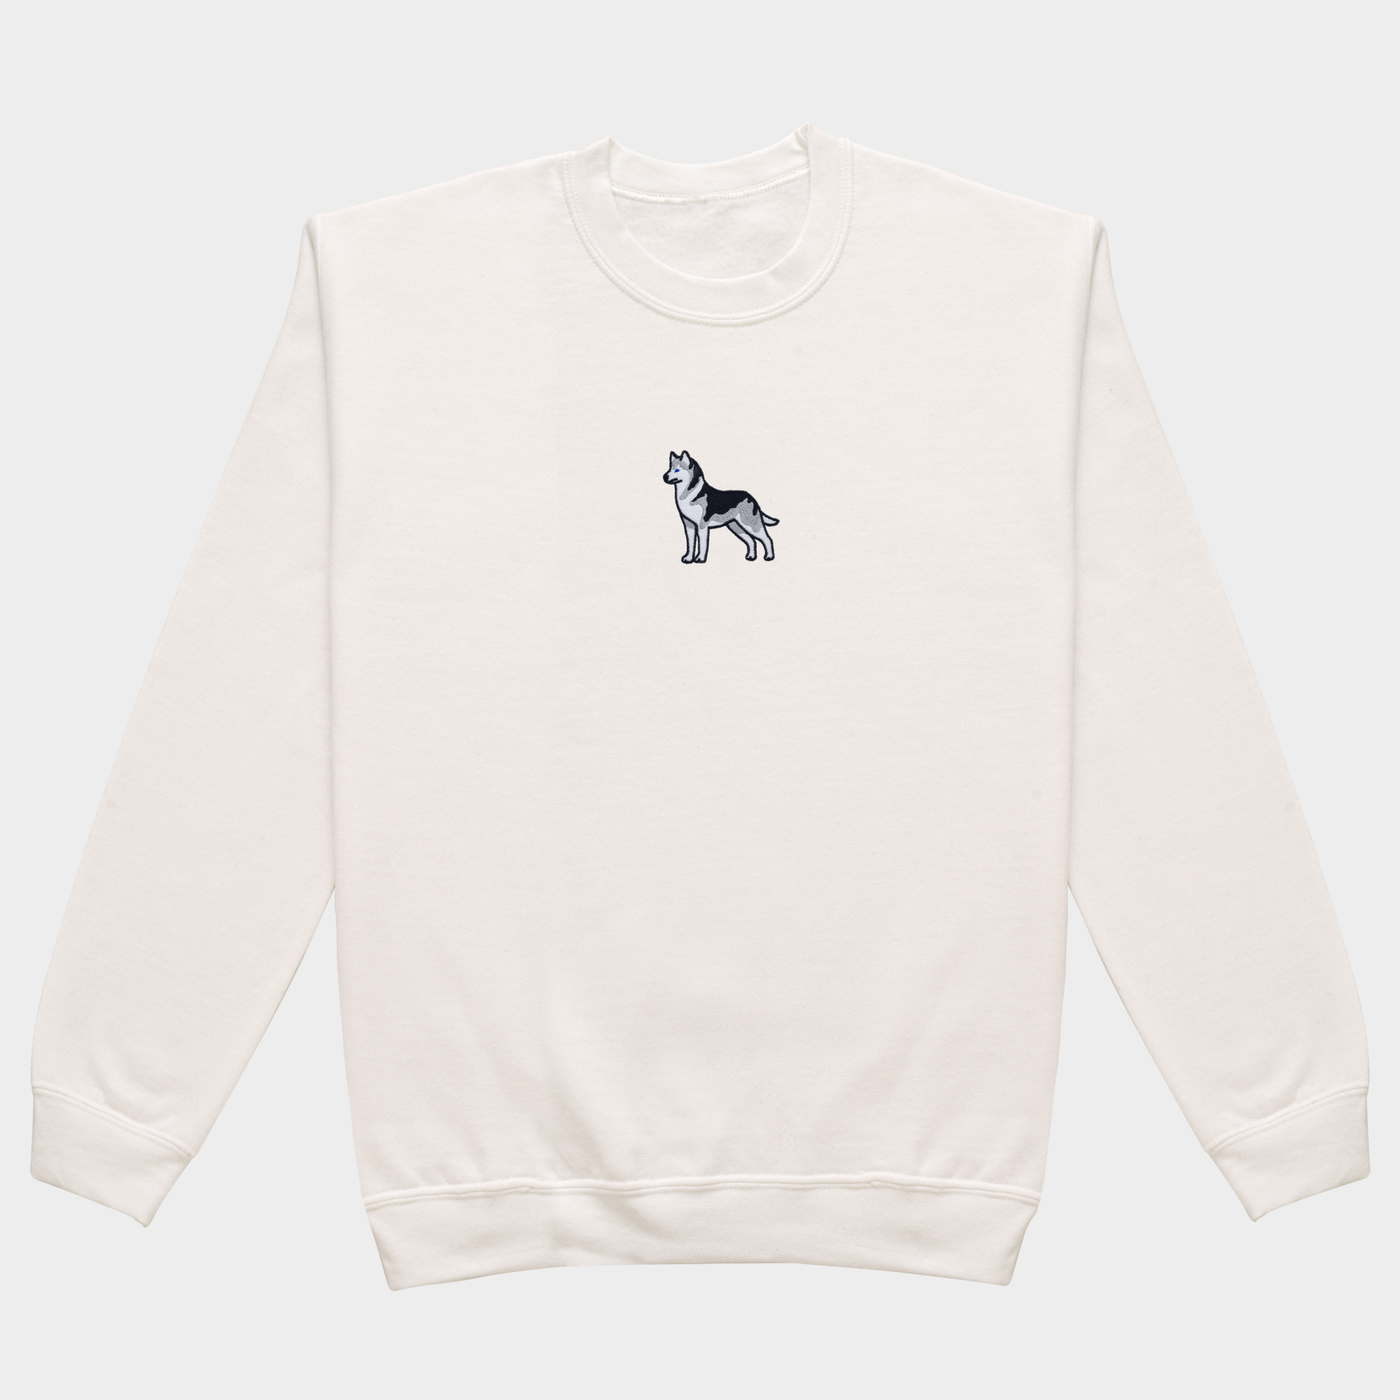 Bobby's Planet Women's Embroidered Siberian Husky Sweatshirt from Paws Dog Cat Animals Collection in White Color#color_white